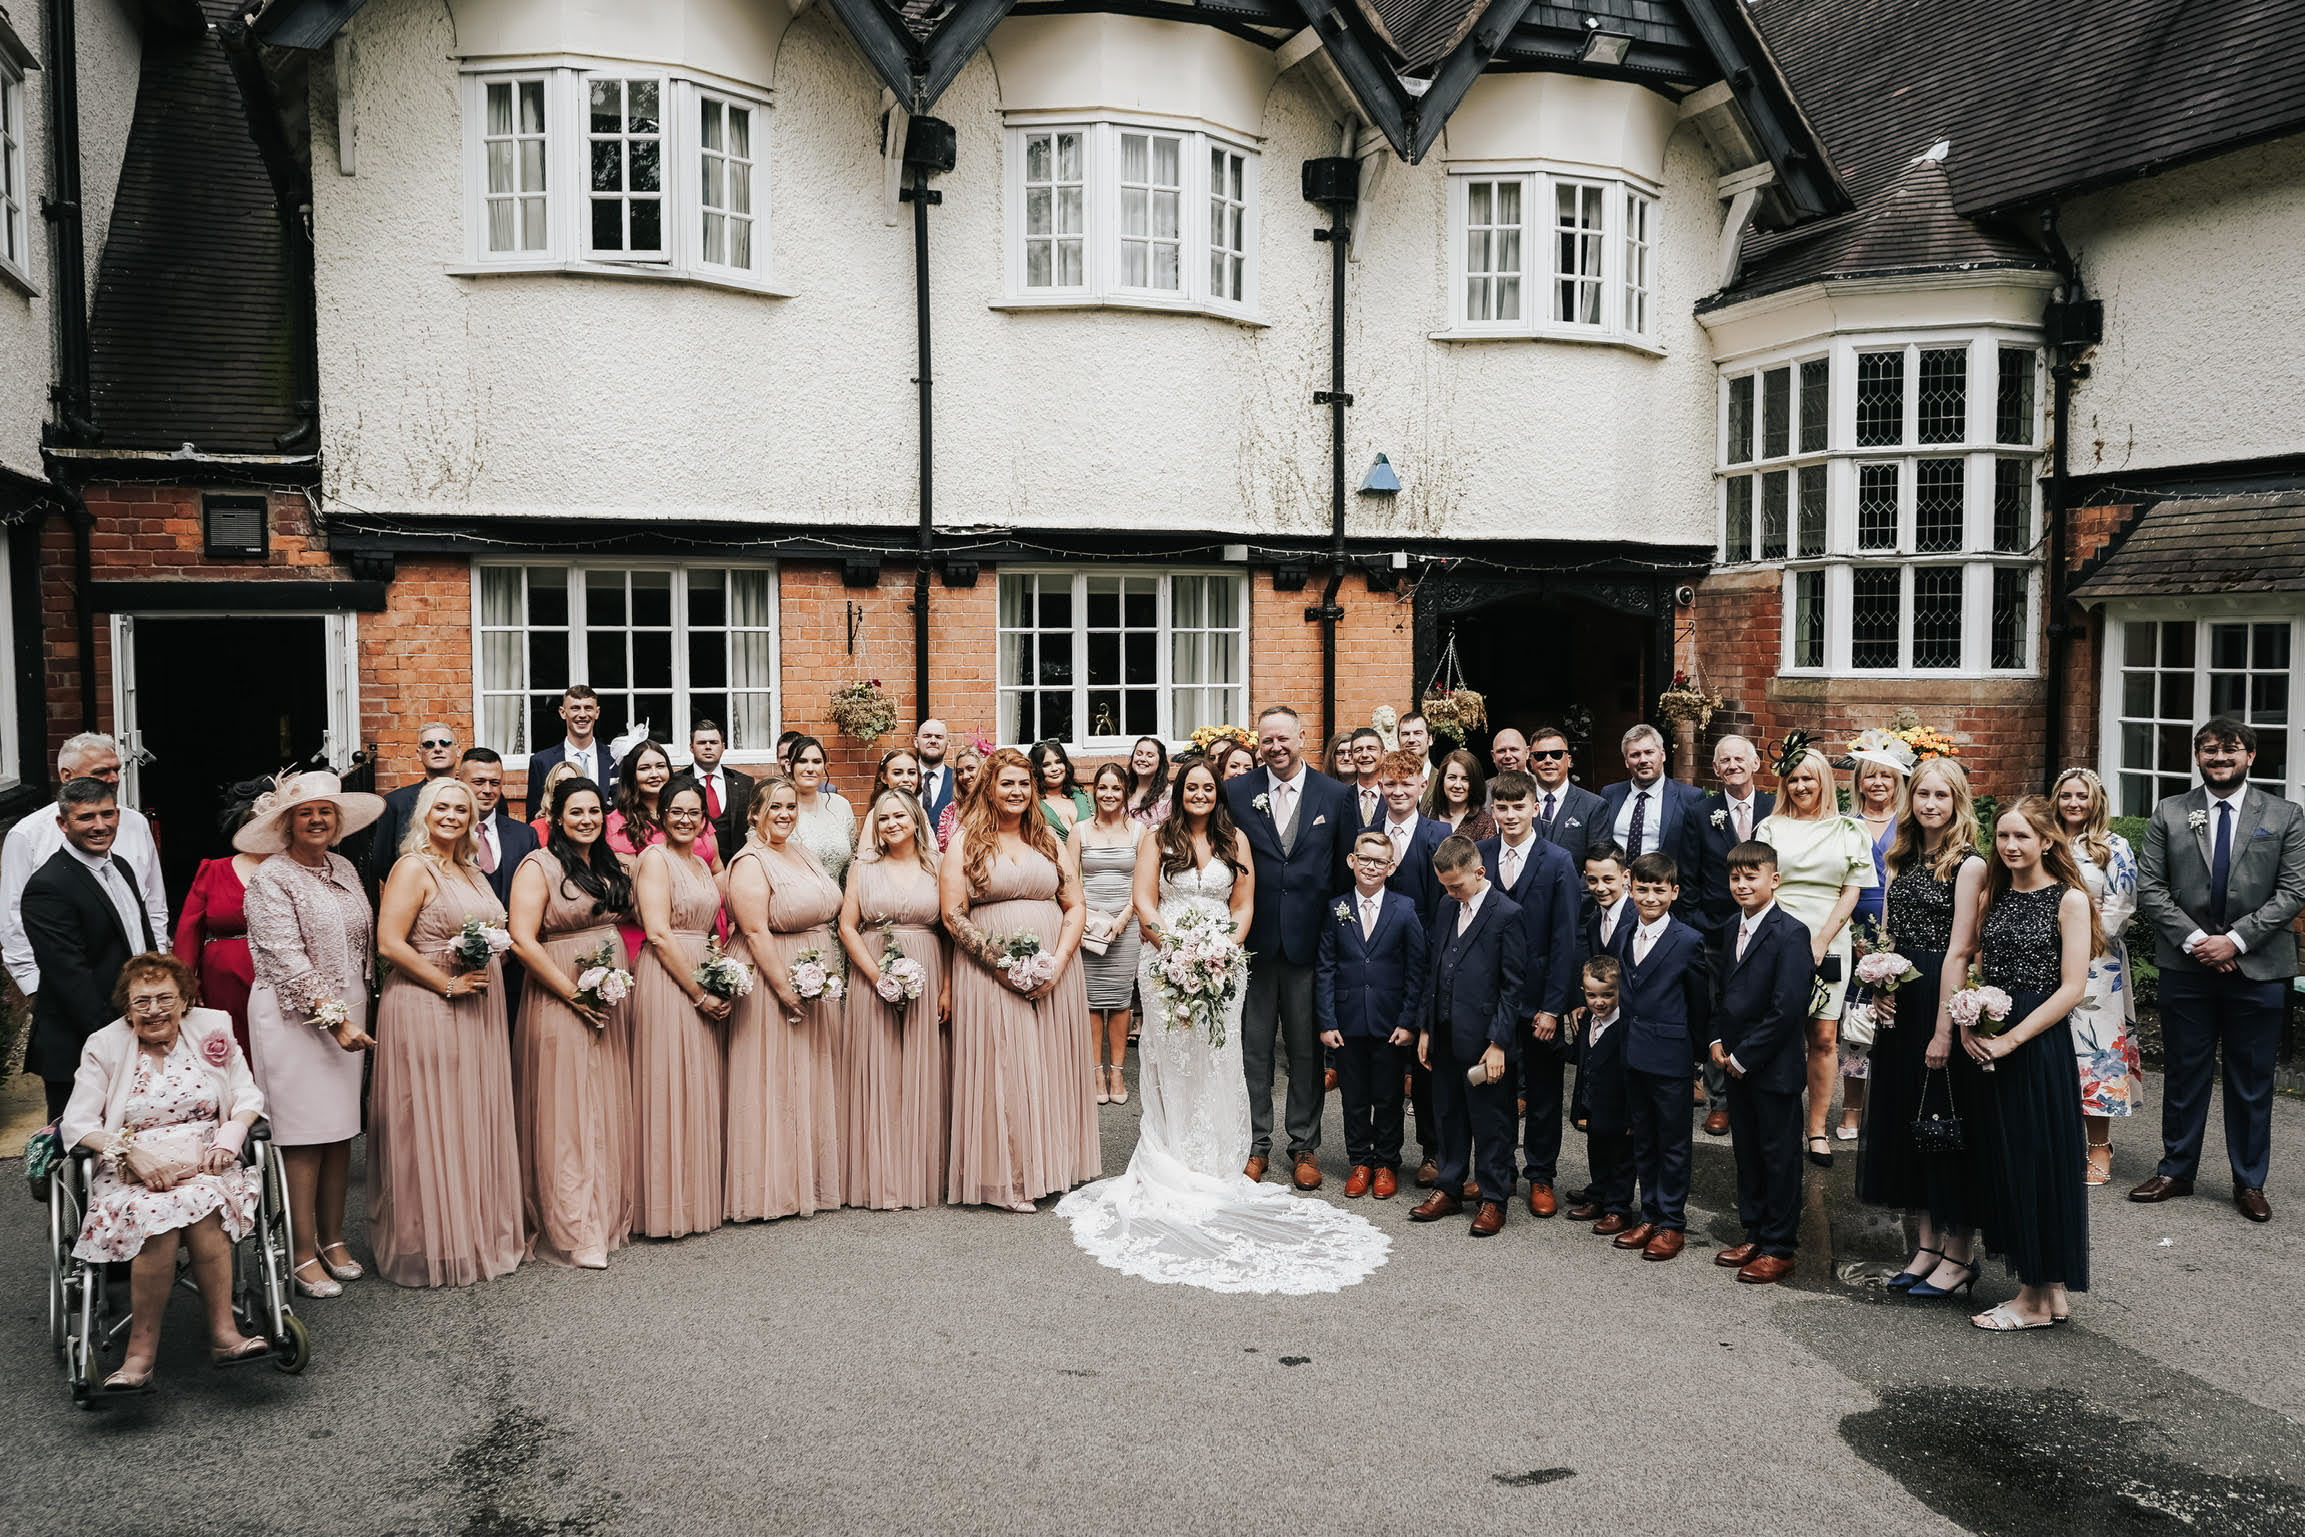 A family-centred wedding day